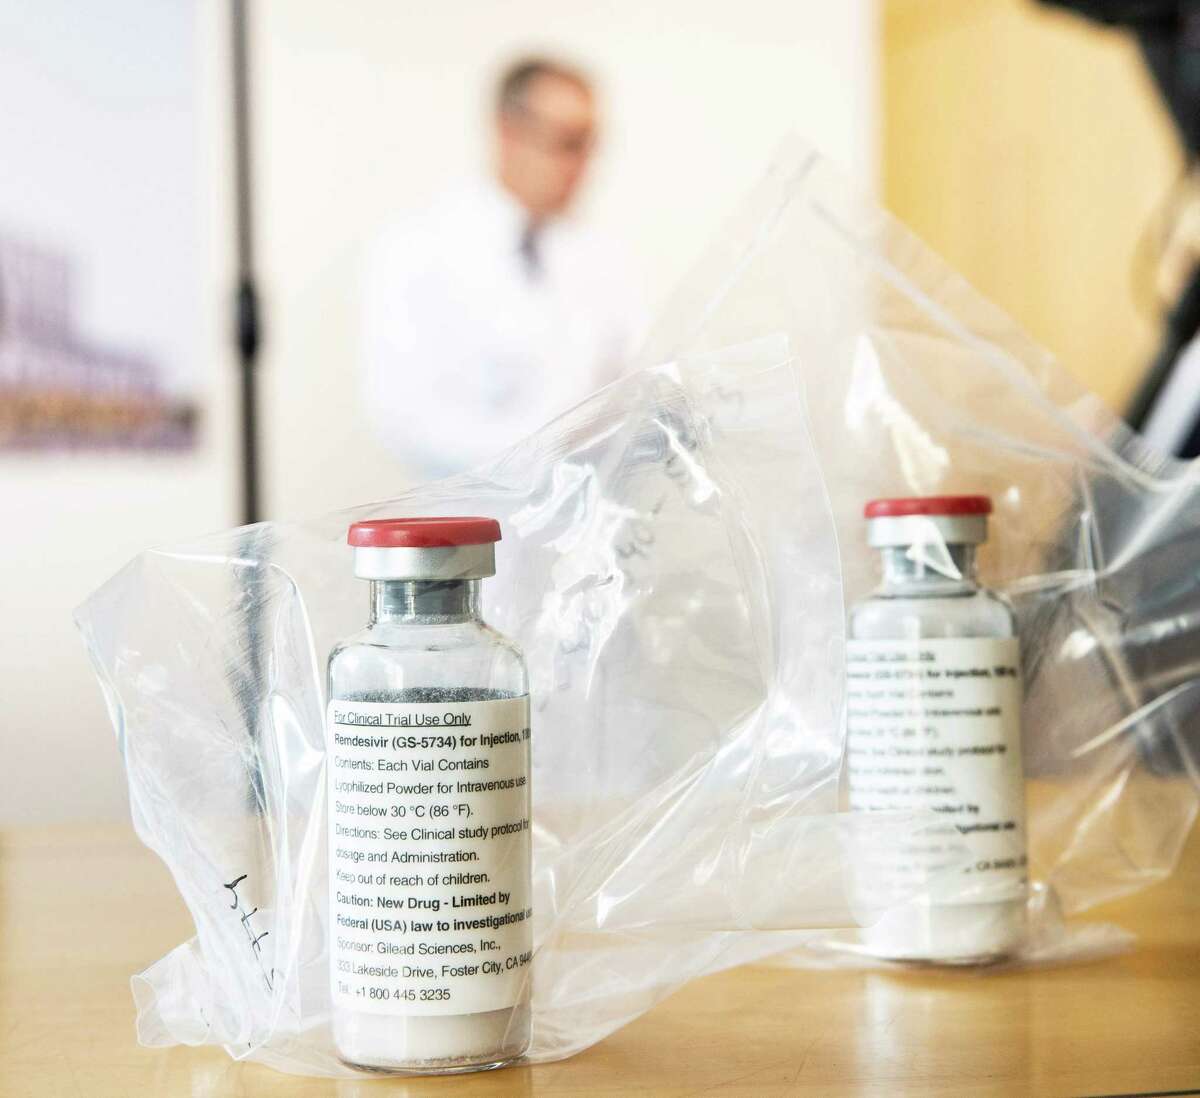 Vials of the drug remdesivir lie during a press conference about the start of a study with the Ebola drug remdesivir in particularly severely ill patients at the University Hospital Eppendorf (UKE) in Hamburg, northern Germany on April 8, 2020, amid the new coronavirus COVID-19 pandemic.